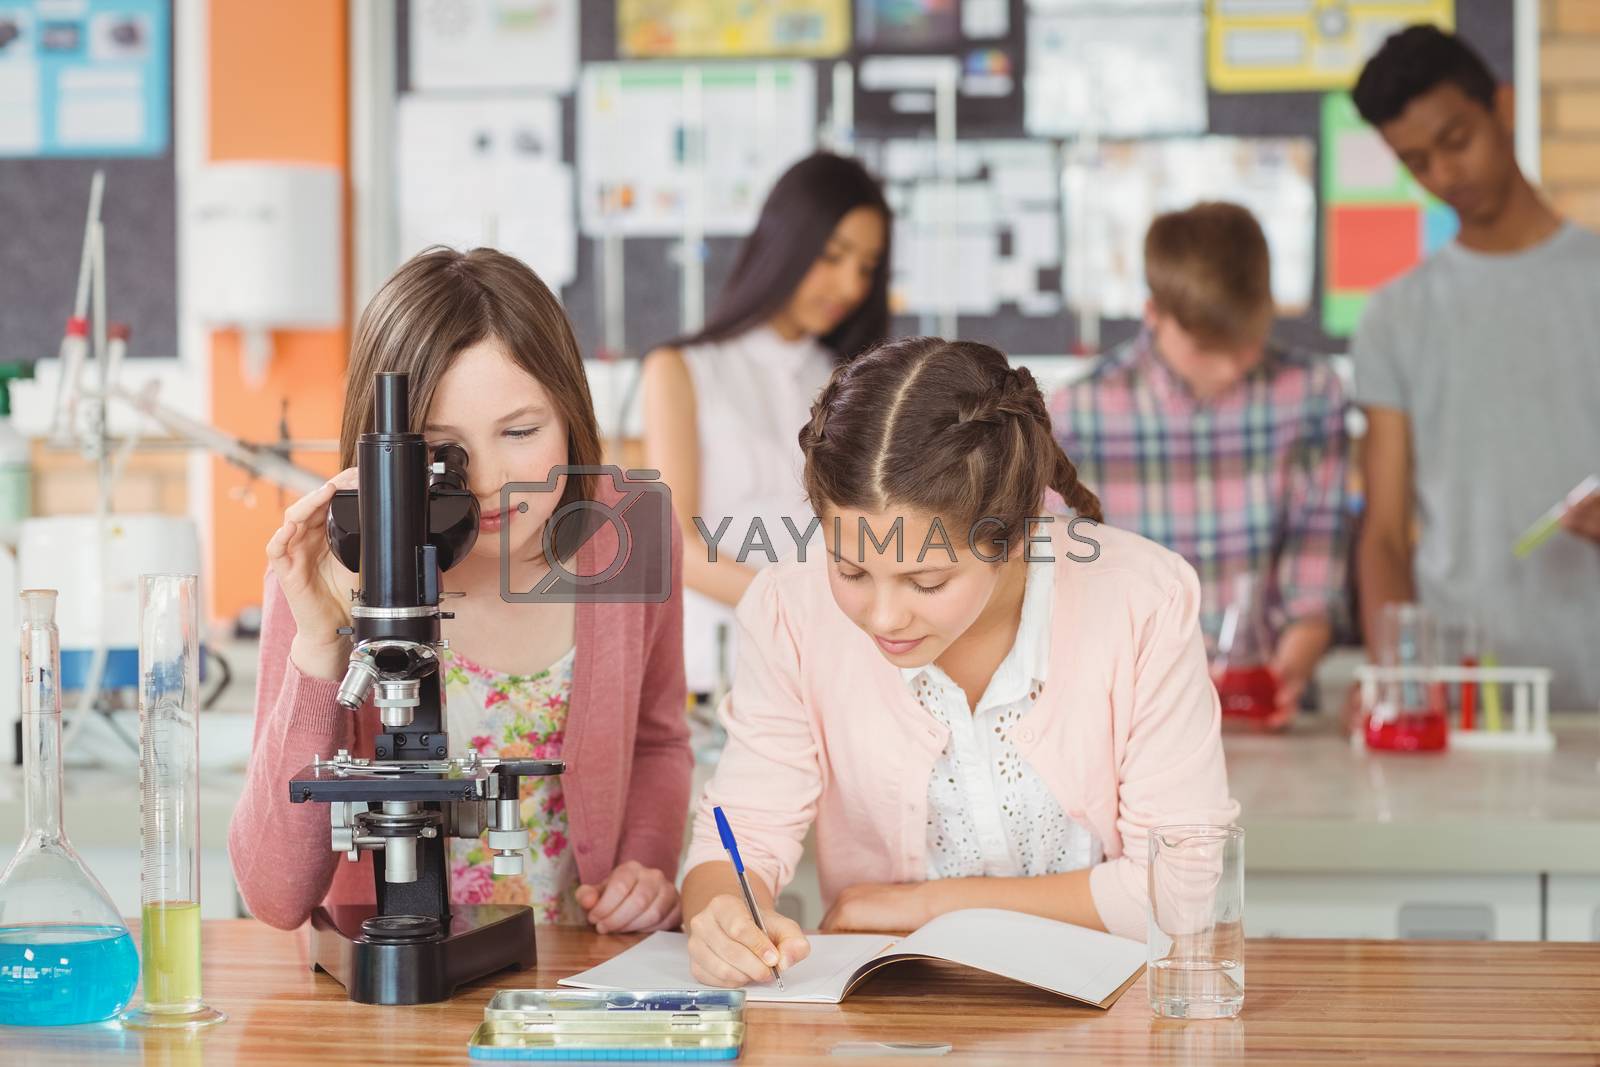 Royalty free image of Students experimenting on microscope in laboratory at school in laboratory by Wavebreakmedia